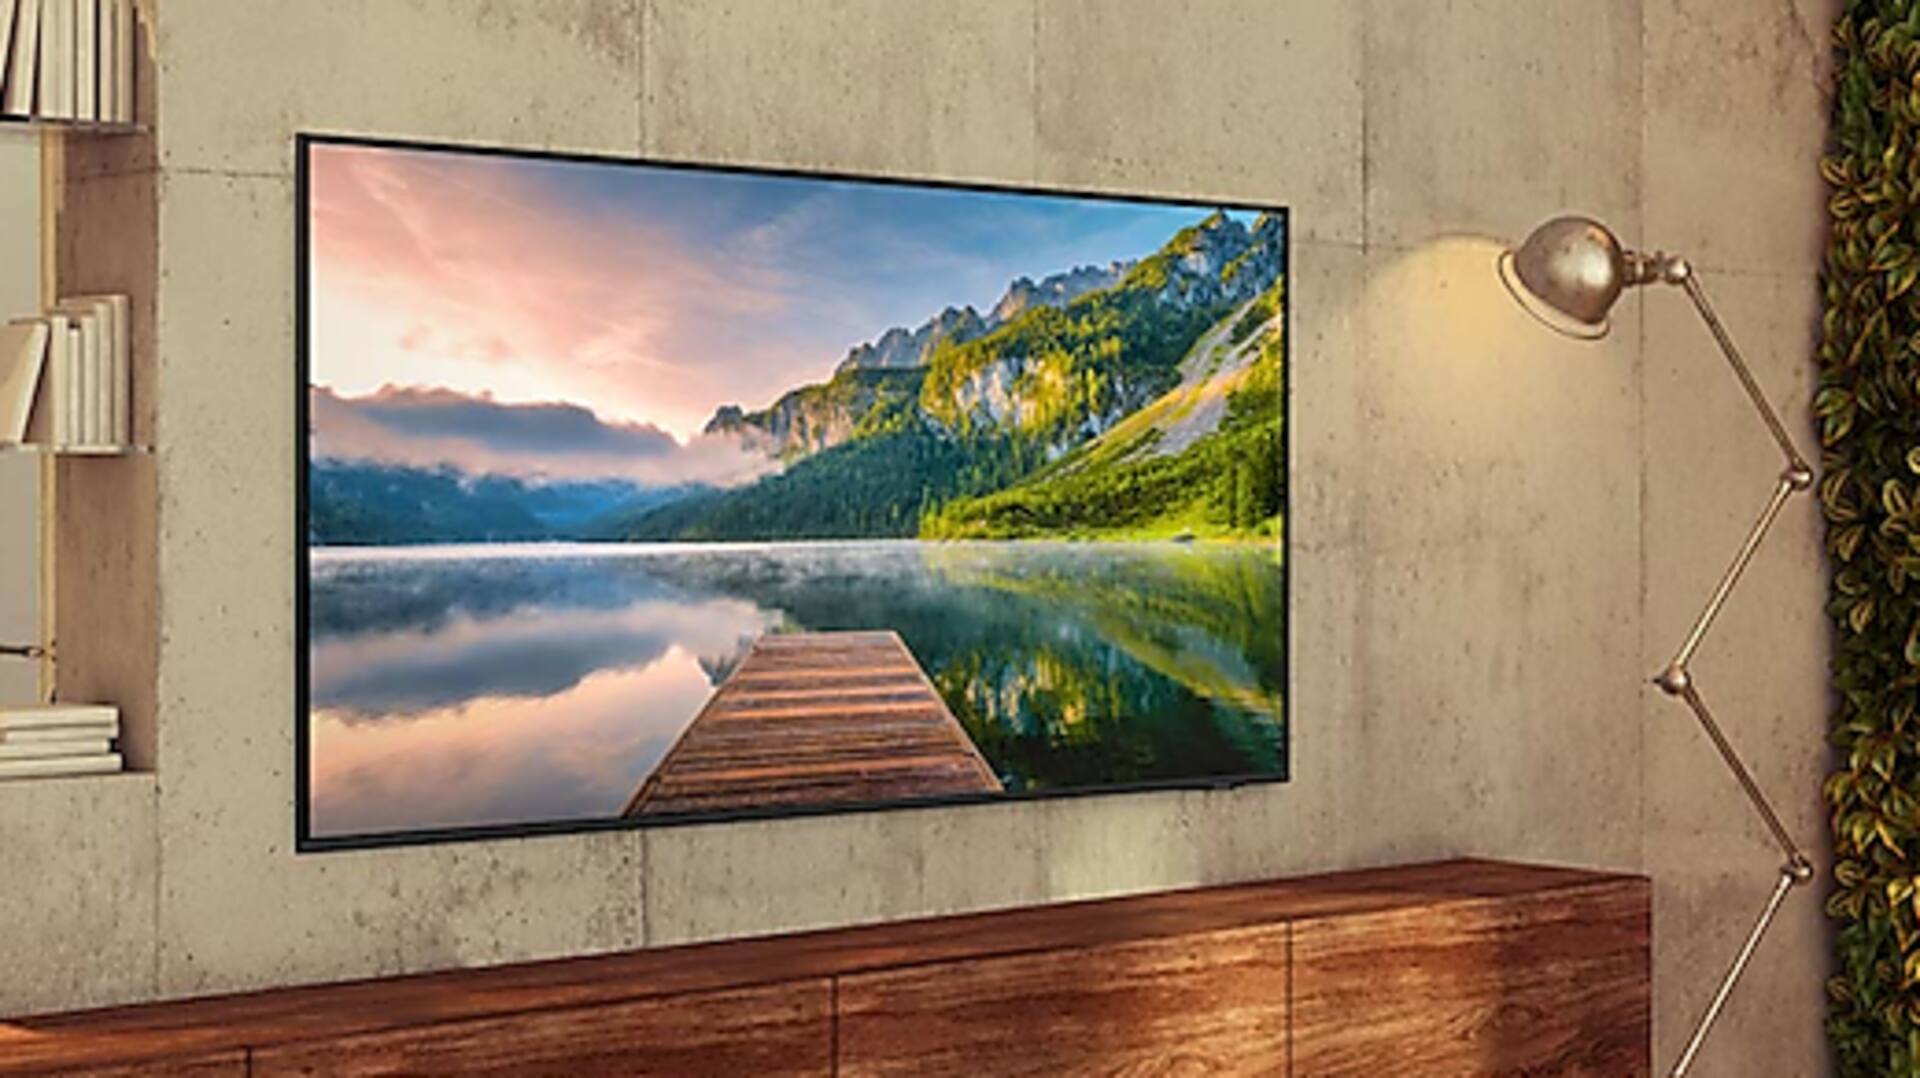 Samsung's 55-inch Crystal 4K TV is 35% cheaper on Amazon